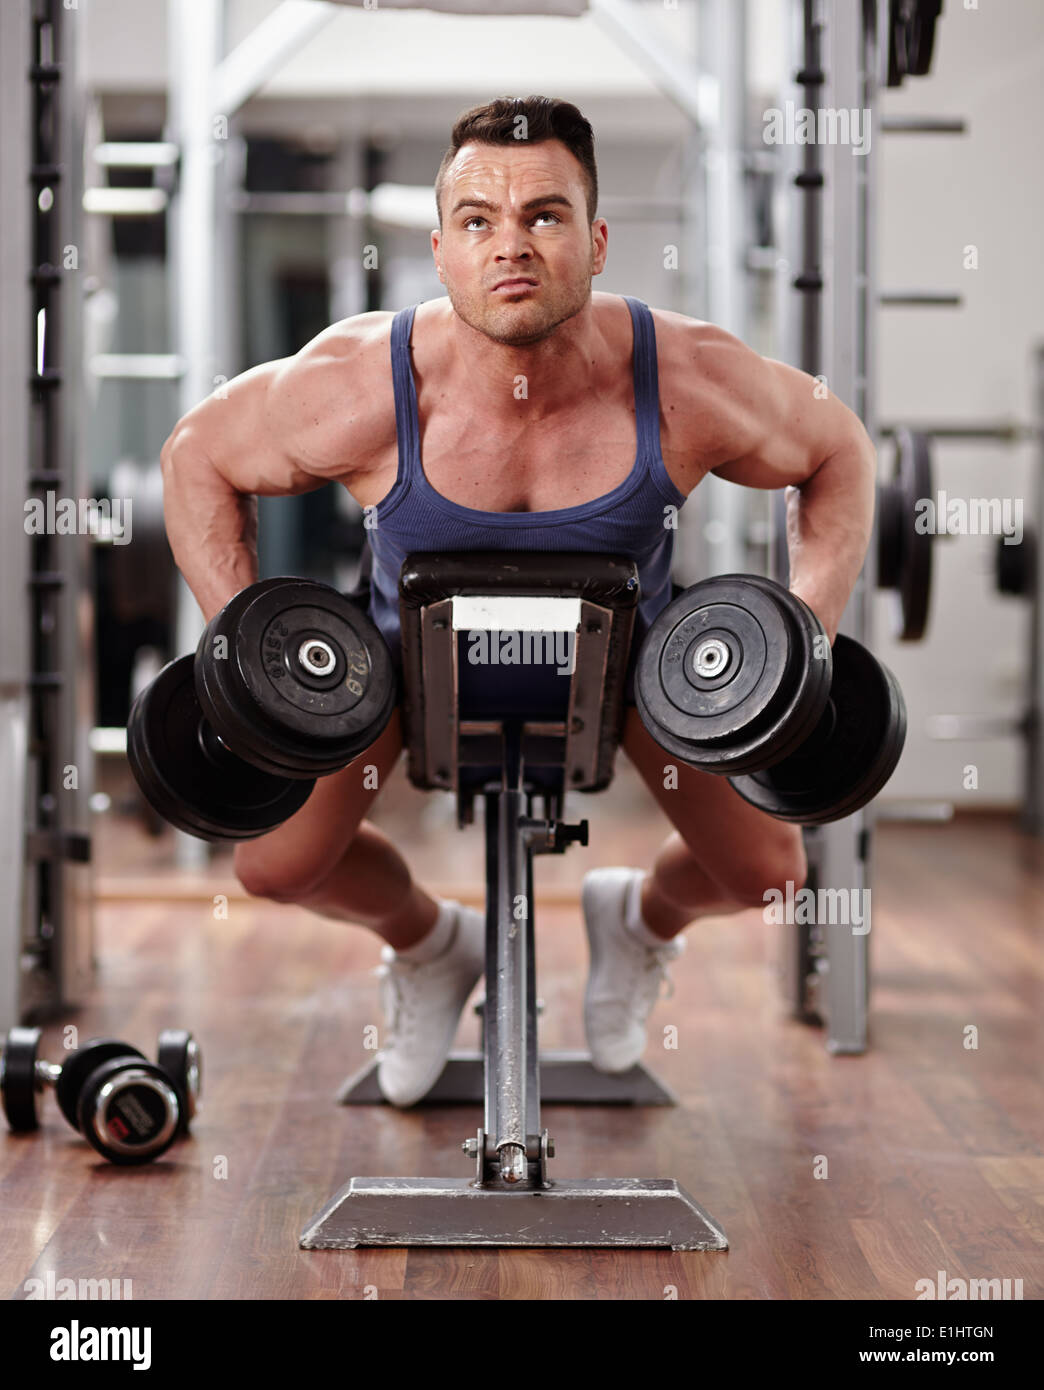 Man doing dumbbell row workout for back muscles Stock Photo - Alamy